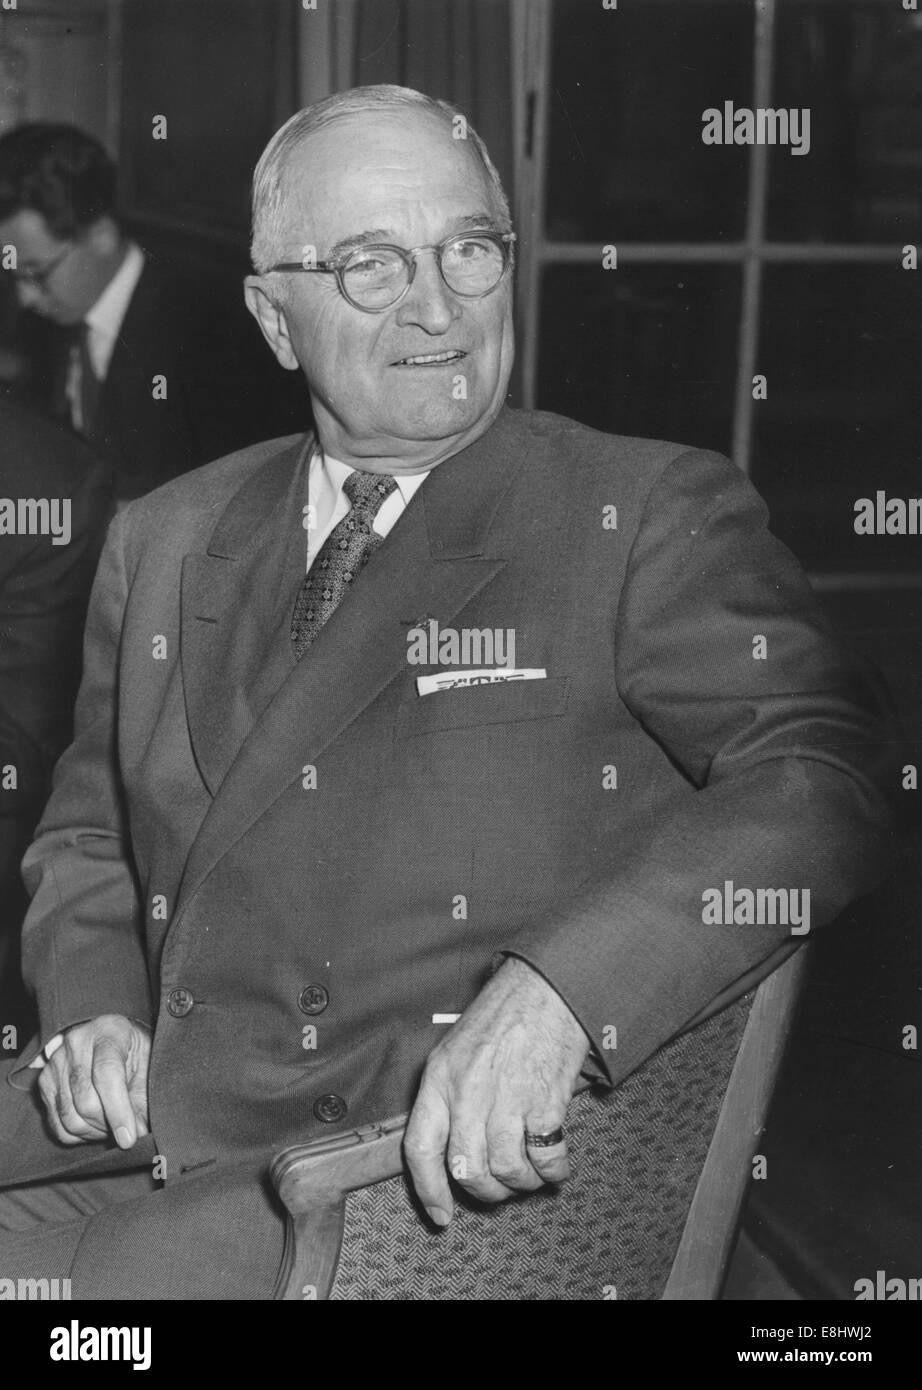 Harry S. 26th Dec, 1972. TRUMAN (May 8, 1884 - December 26, 1972) was the 33rd President of the United States (1945-1953). Truman became President of the United States with the death of F. D. Roosevelt on April 12, 1945. During his nearly eight years in office, Truman confronted enormous challenges in both foreign and domestic affairs. PICTURED: Jun 18, 1956 - London, England, United Kingdom - United States President HARRY S. TRUMAN at a press conference at the Savoy Hotel in London. © KEYSTONE Pictures/ZUMA Wire/ZUMAPRESS.com/Alamy Live News Stock Photo